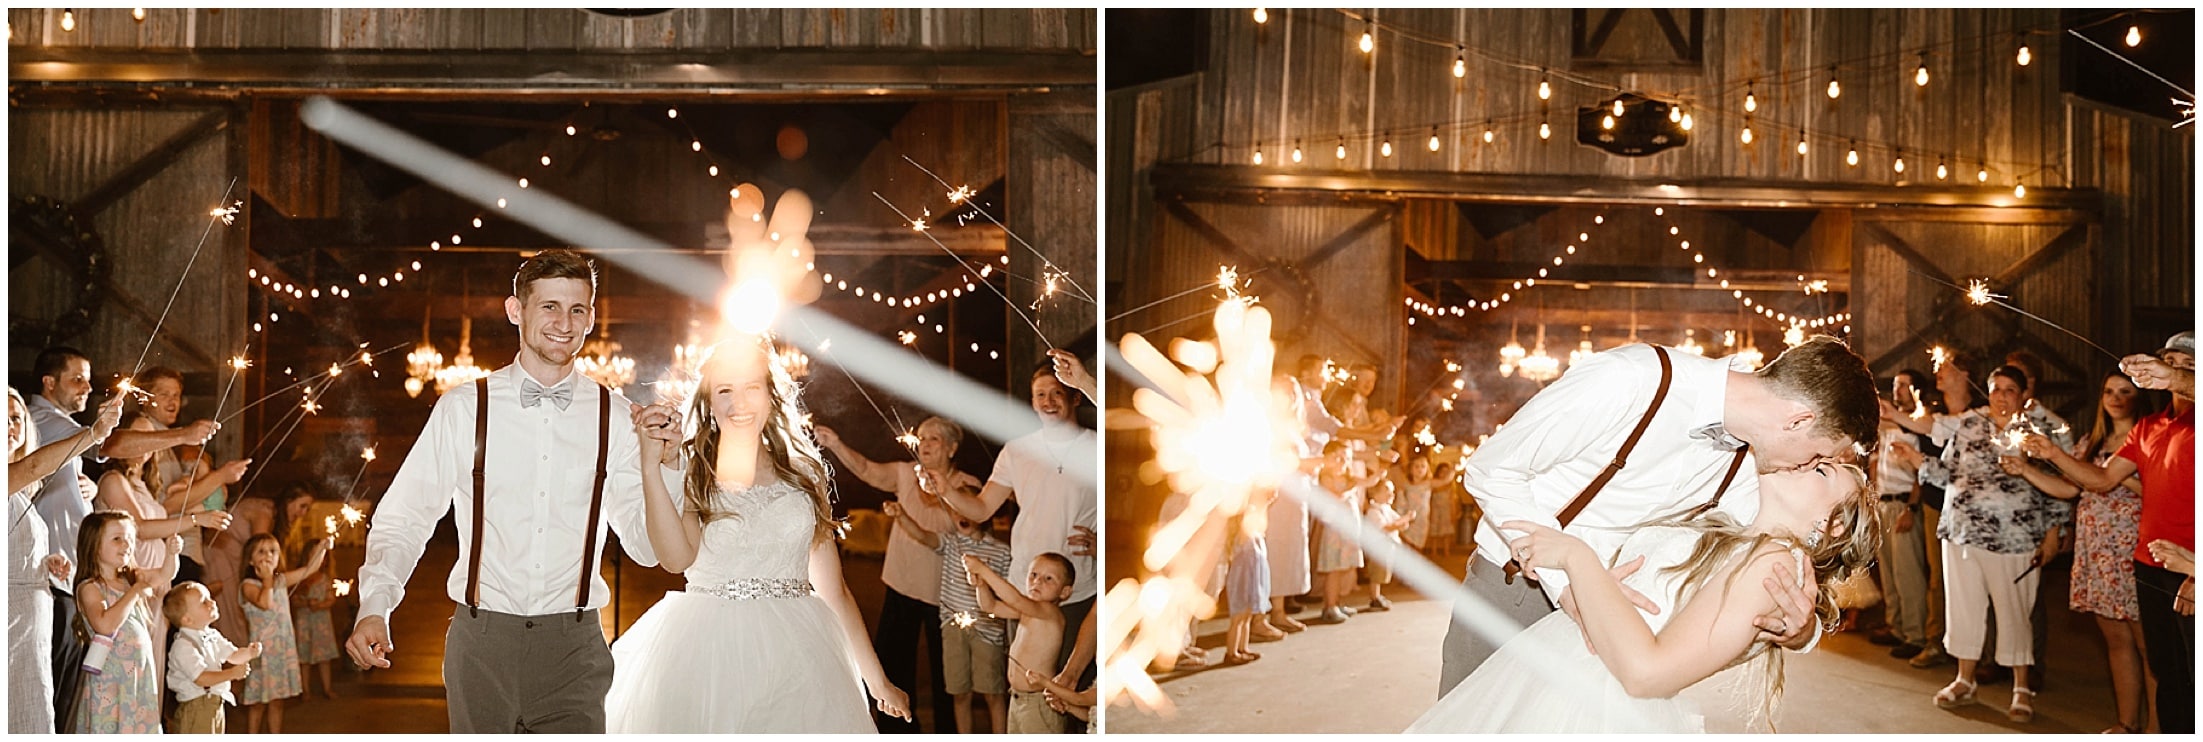 sparkler exit, Brit Nicole Photography, West Texas Barn Wedding, West Texas Small Wedding, West Texas wedding venue, DJ Platinum, Vera Wang engagement ring, Zales Manly Bands wedding ring, David's Bridal wedding dress, Krazy Cakes brides wedding cake, wedding cupcake, Betsey Johnson wedding high heels, Joy's Downtown Flowers wedding decor, Sparrow Creek Ranch, texas wedding ranch, places to get married in Texas, small intimate wedding, summer wedding, texas sky, bride and groom first look, first look with dad, matching bridesmaids robes, June wedding, junebug weddings, wandering weddings, the knot, best weddings